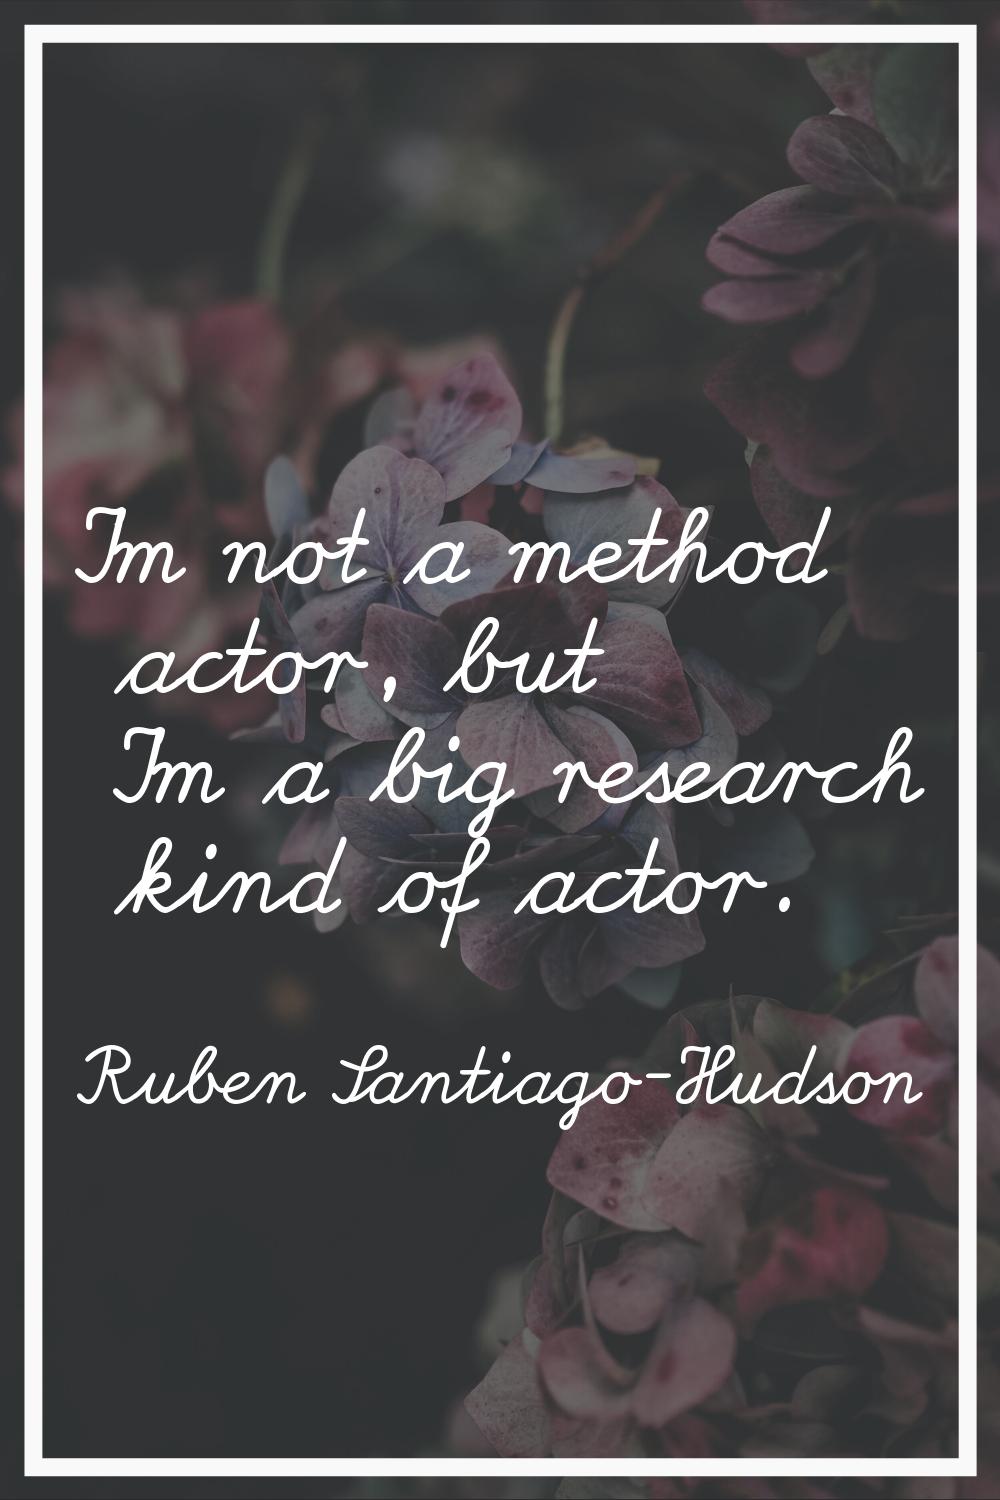 I'm not a method actor, but I'm a big research kind of actor.